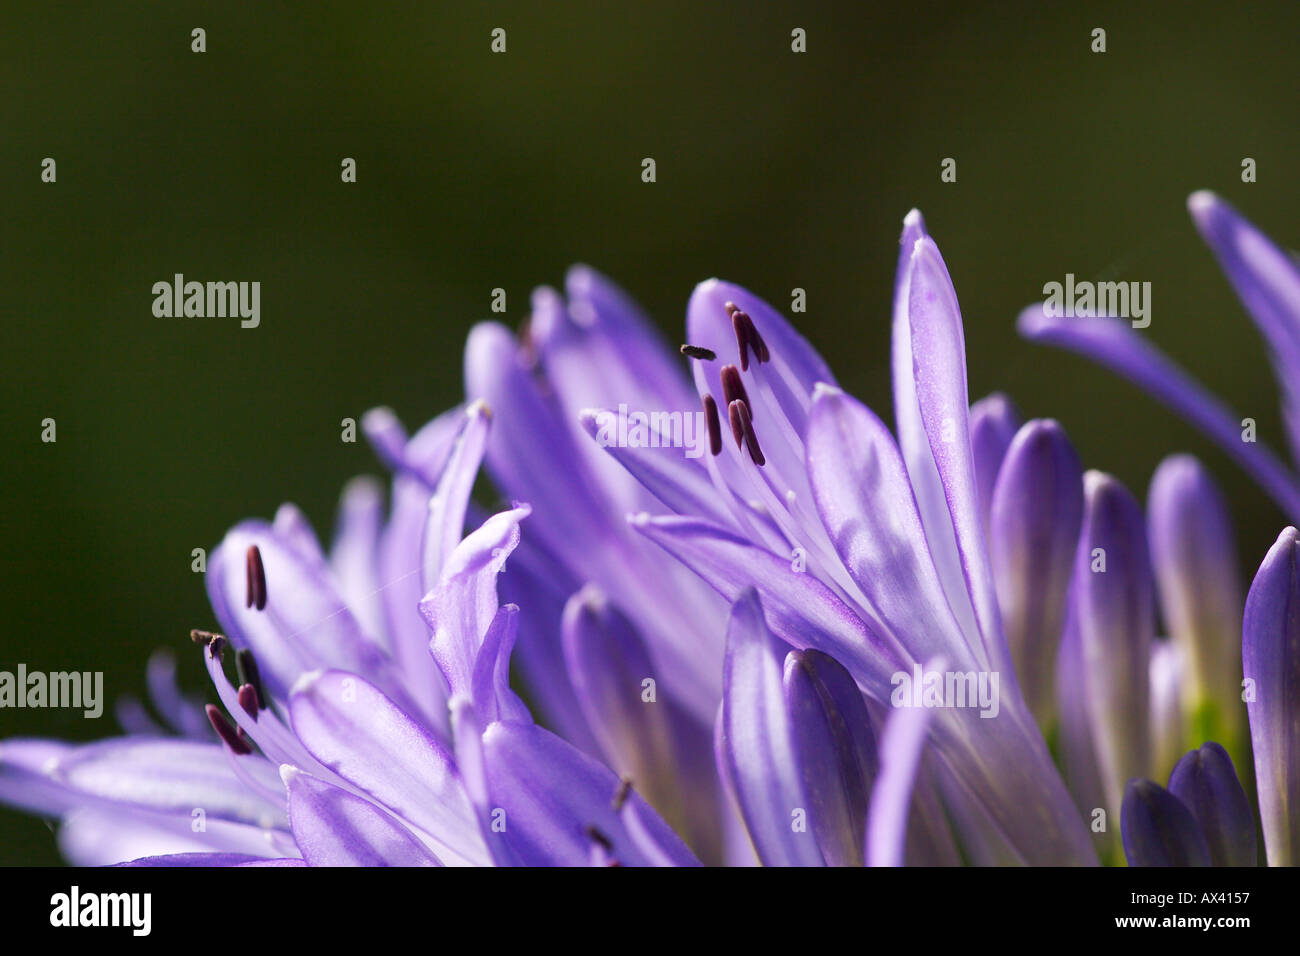 flower of Lily Agapanthus Stock Photo